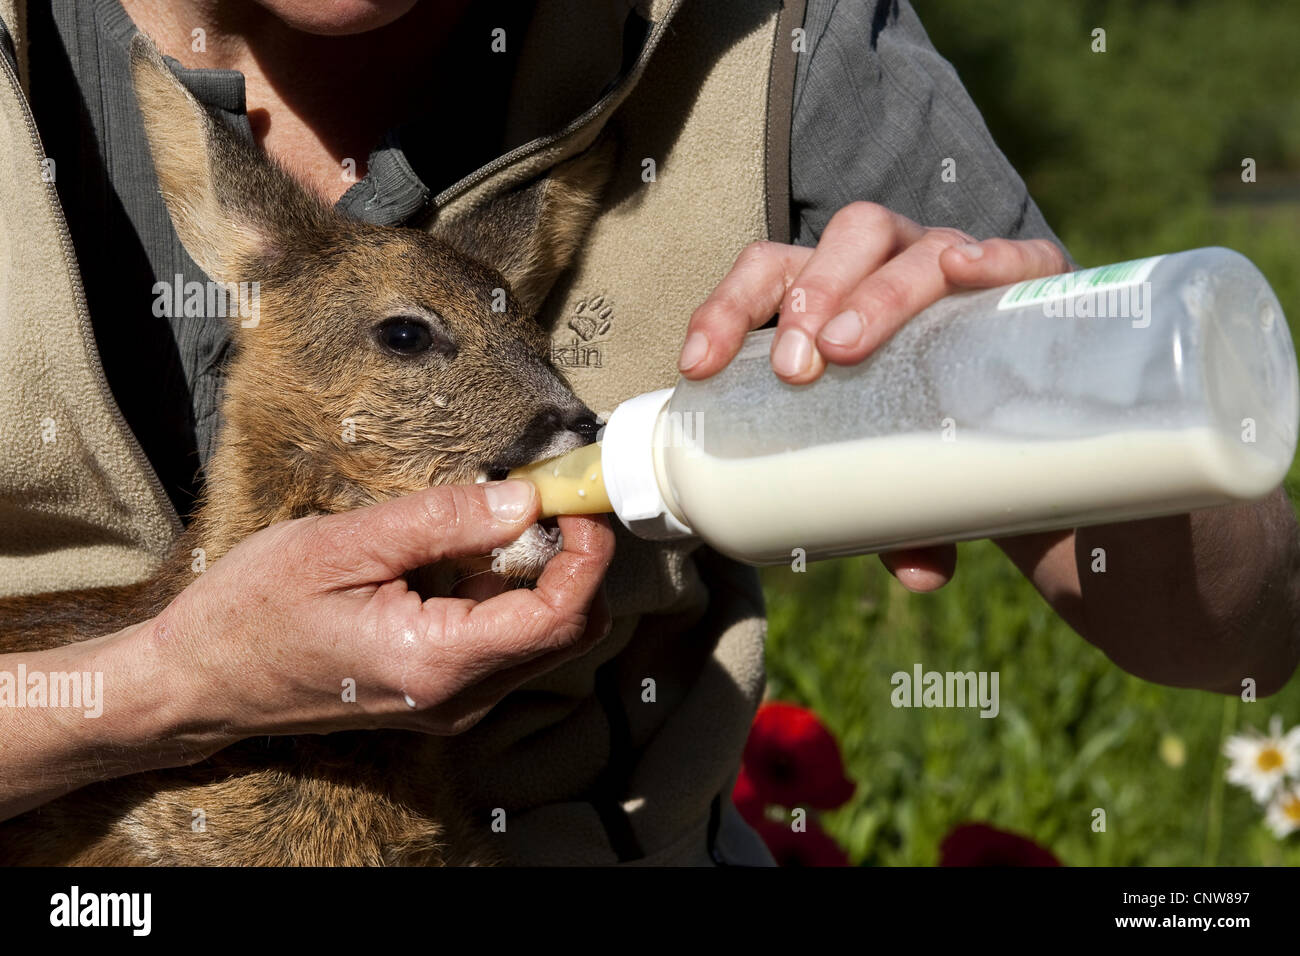 roe deer (Capreolus capreolus), a few days old orphaned fawn being fed with surrogate milk from a bottle by a woman, Germany Stock Photo